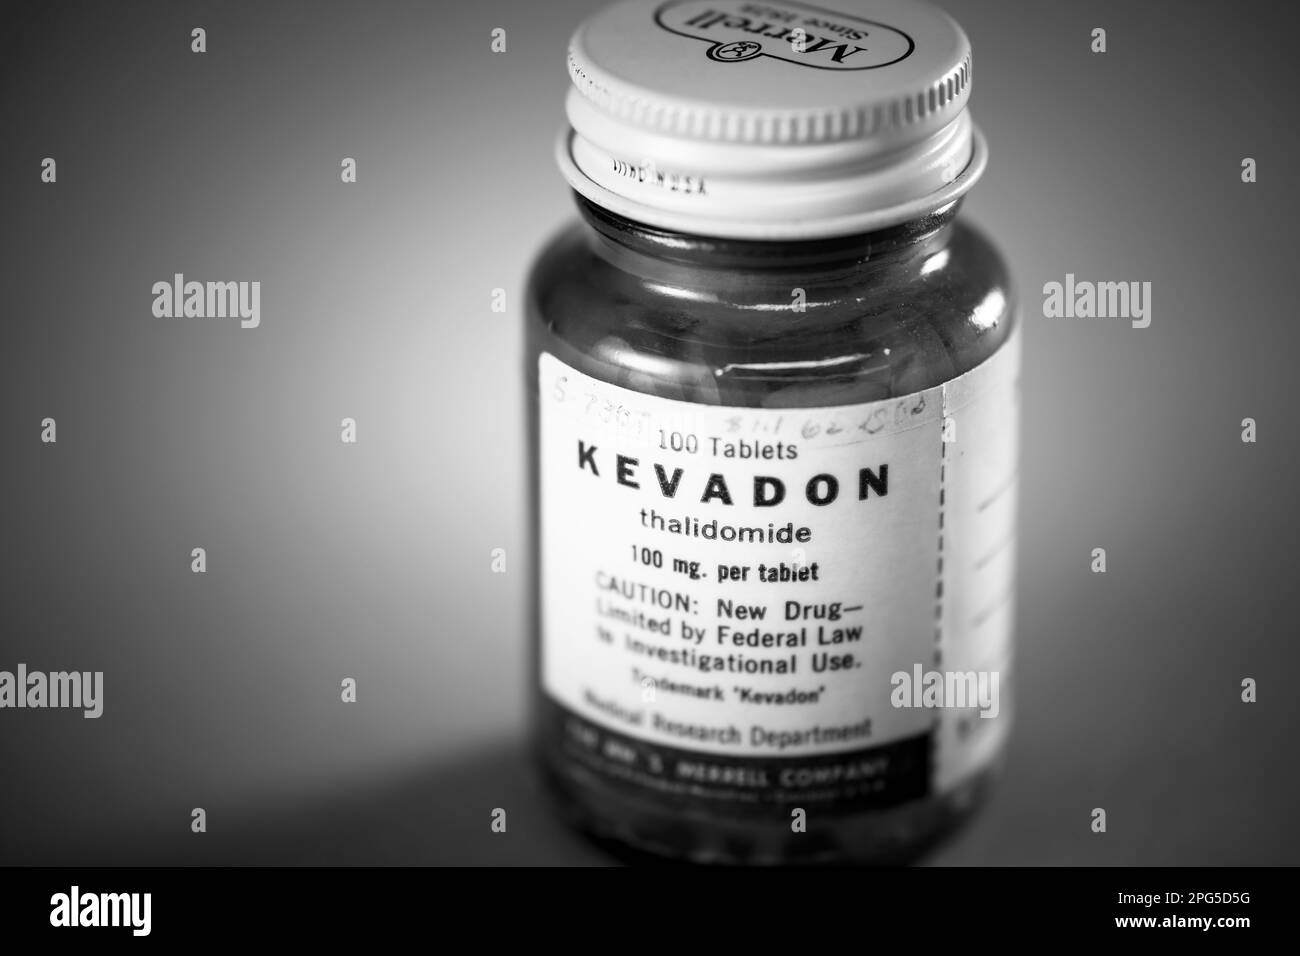 Kevadon, a William S. Merrell Company brand of thalidomide, a drug which was prevented from being approved in the U.S. by FDA pharmacologist Dr. Frances Kelsey in 1960. The drug was found to cause serious birth defects and Kelsey was awarded the President's Award for Distinguished Federal Civilian Service by John F. Kennedy in 1962 for refusing, despite strong pressure, to approve the drug. Stock Photo